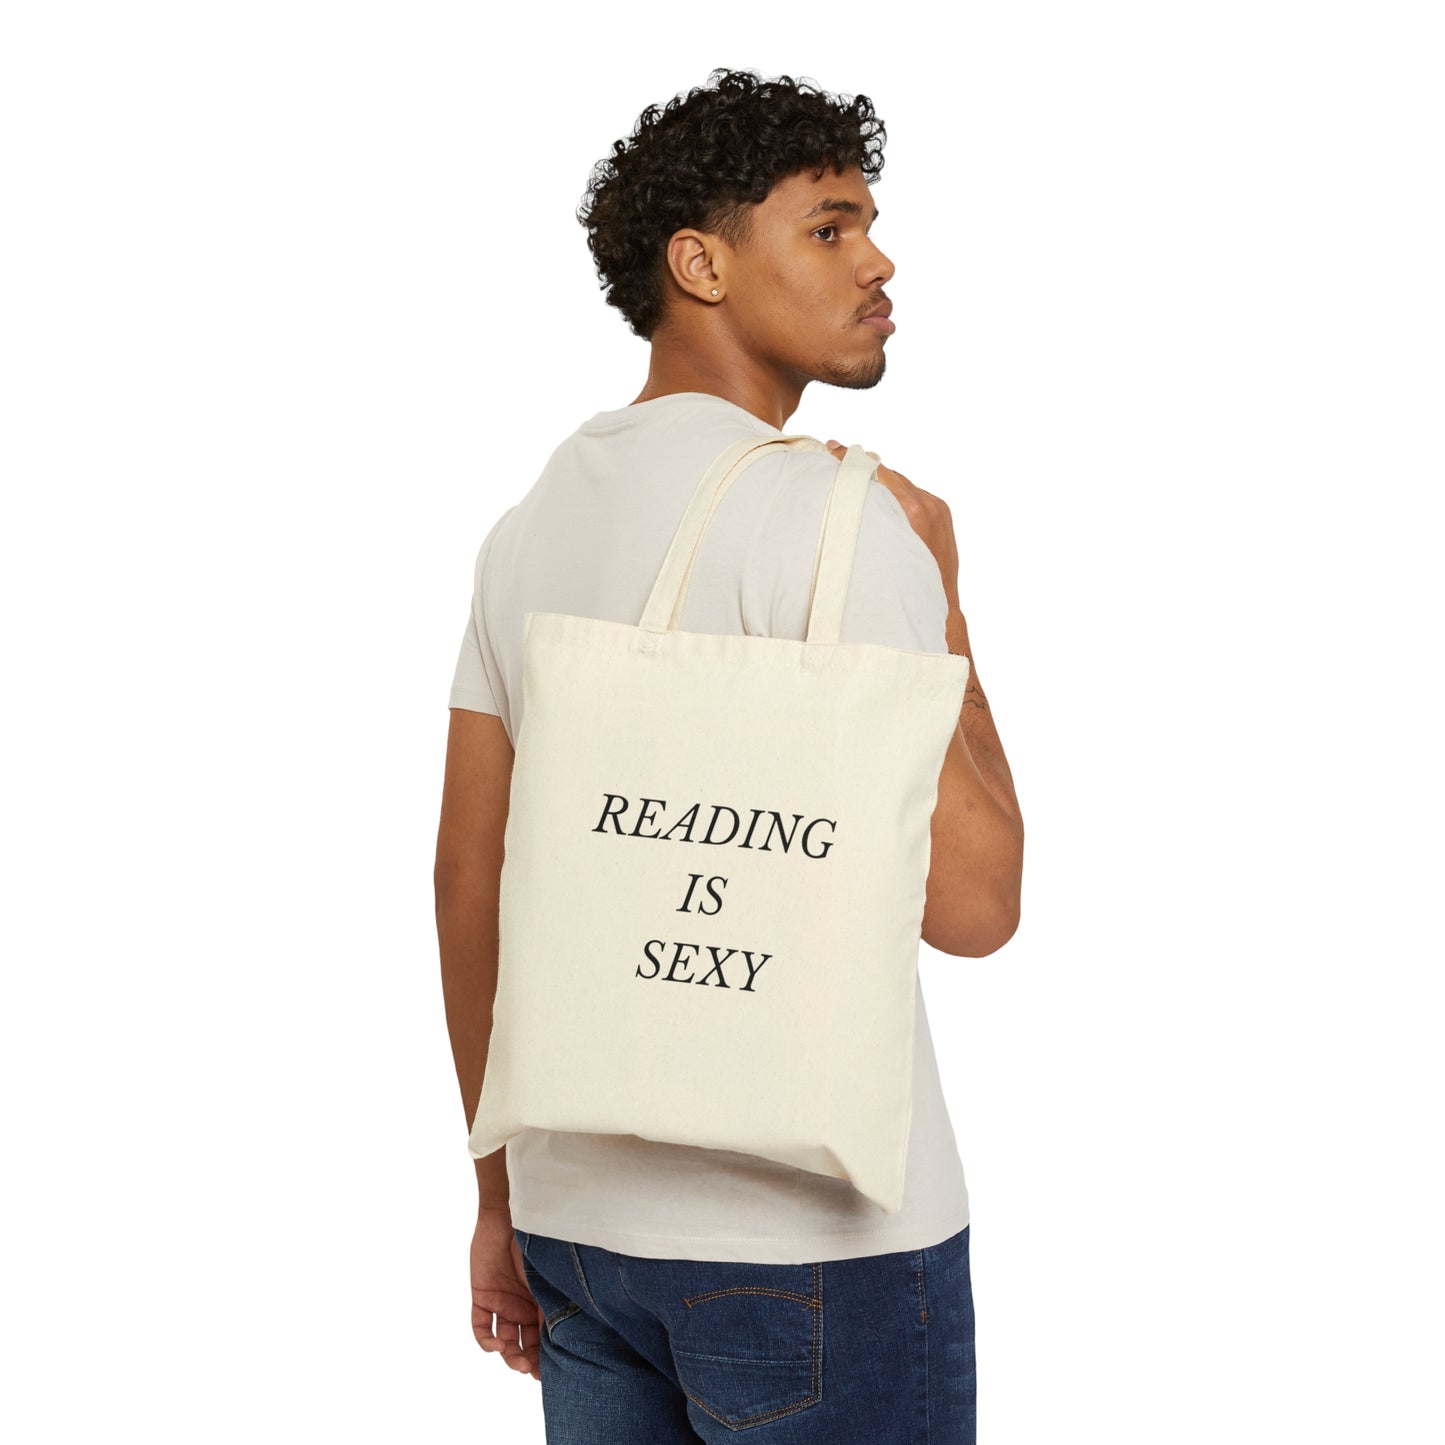 READING IS SEXY Black Cotton Tote Bag